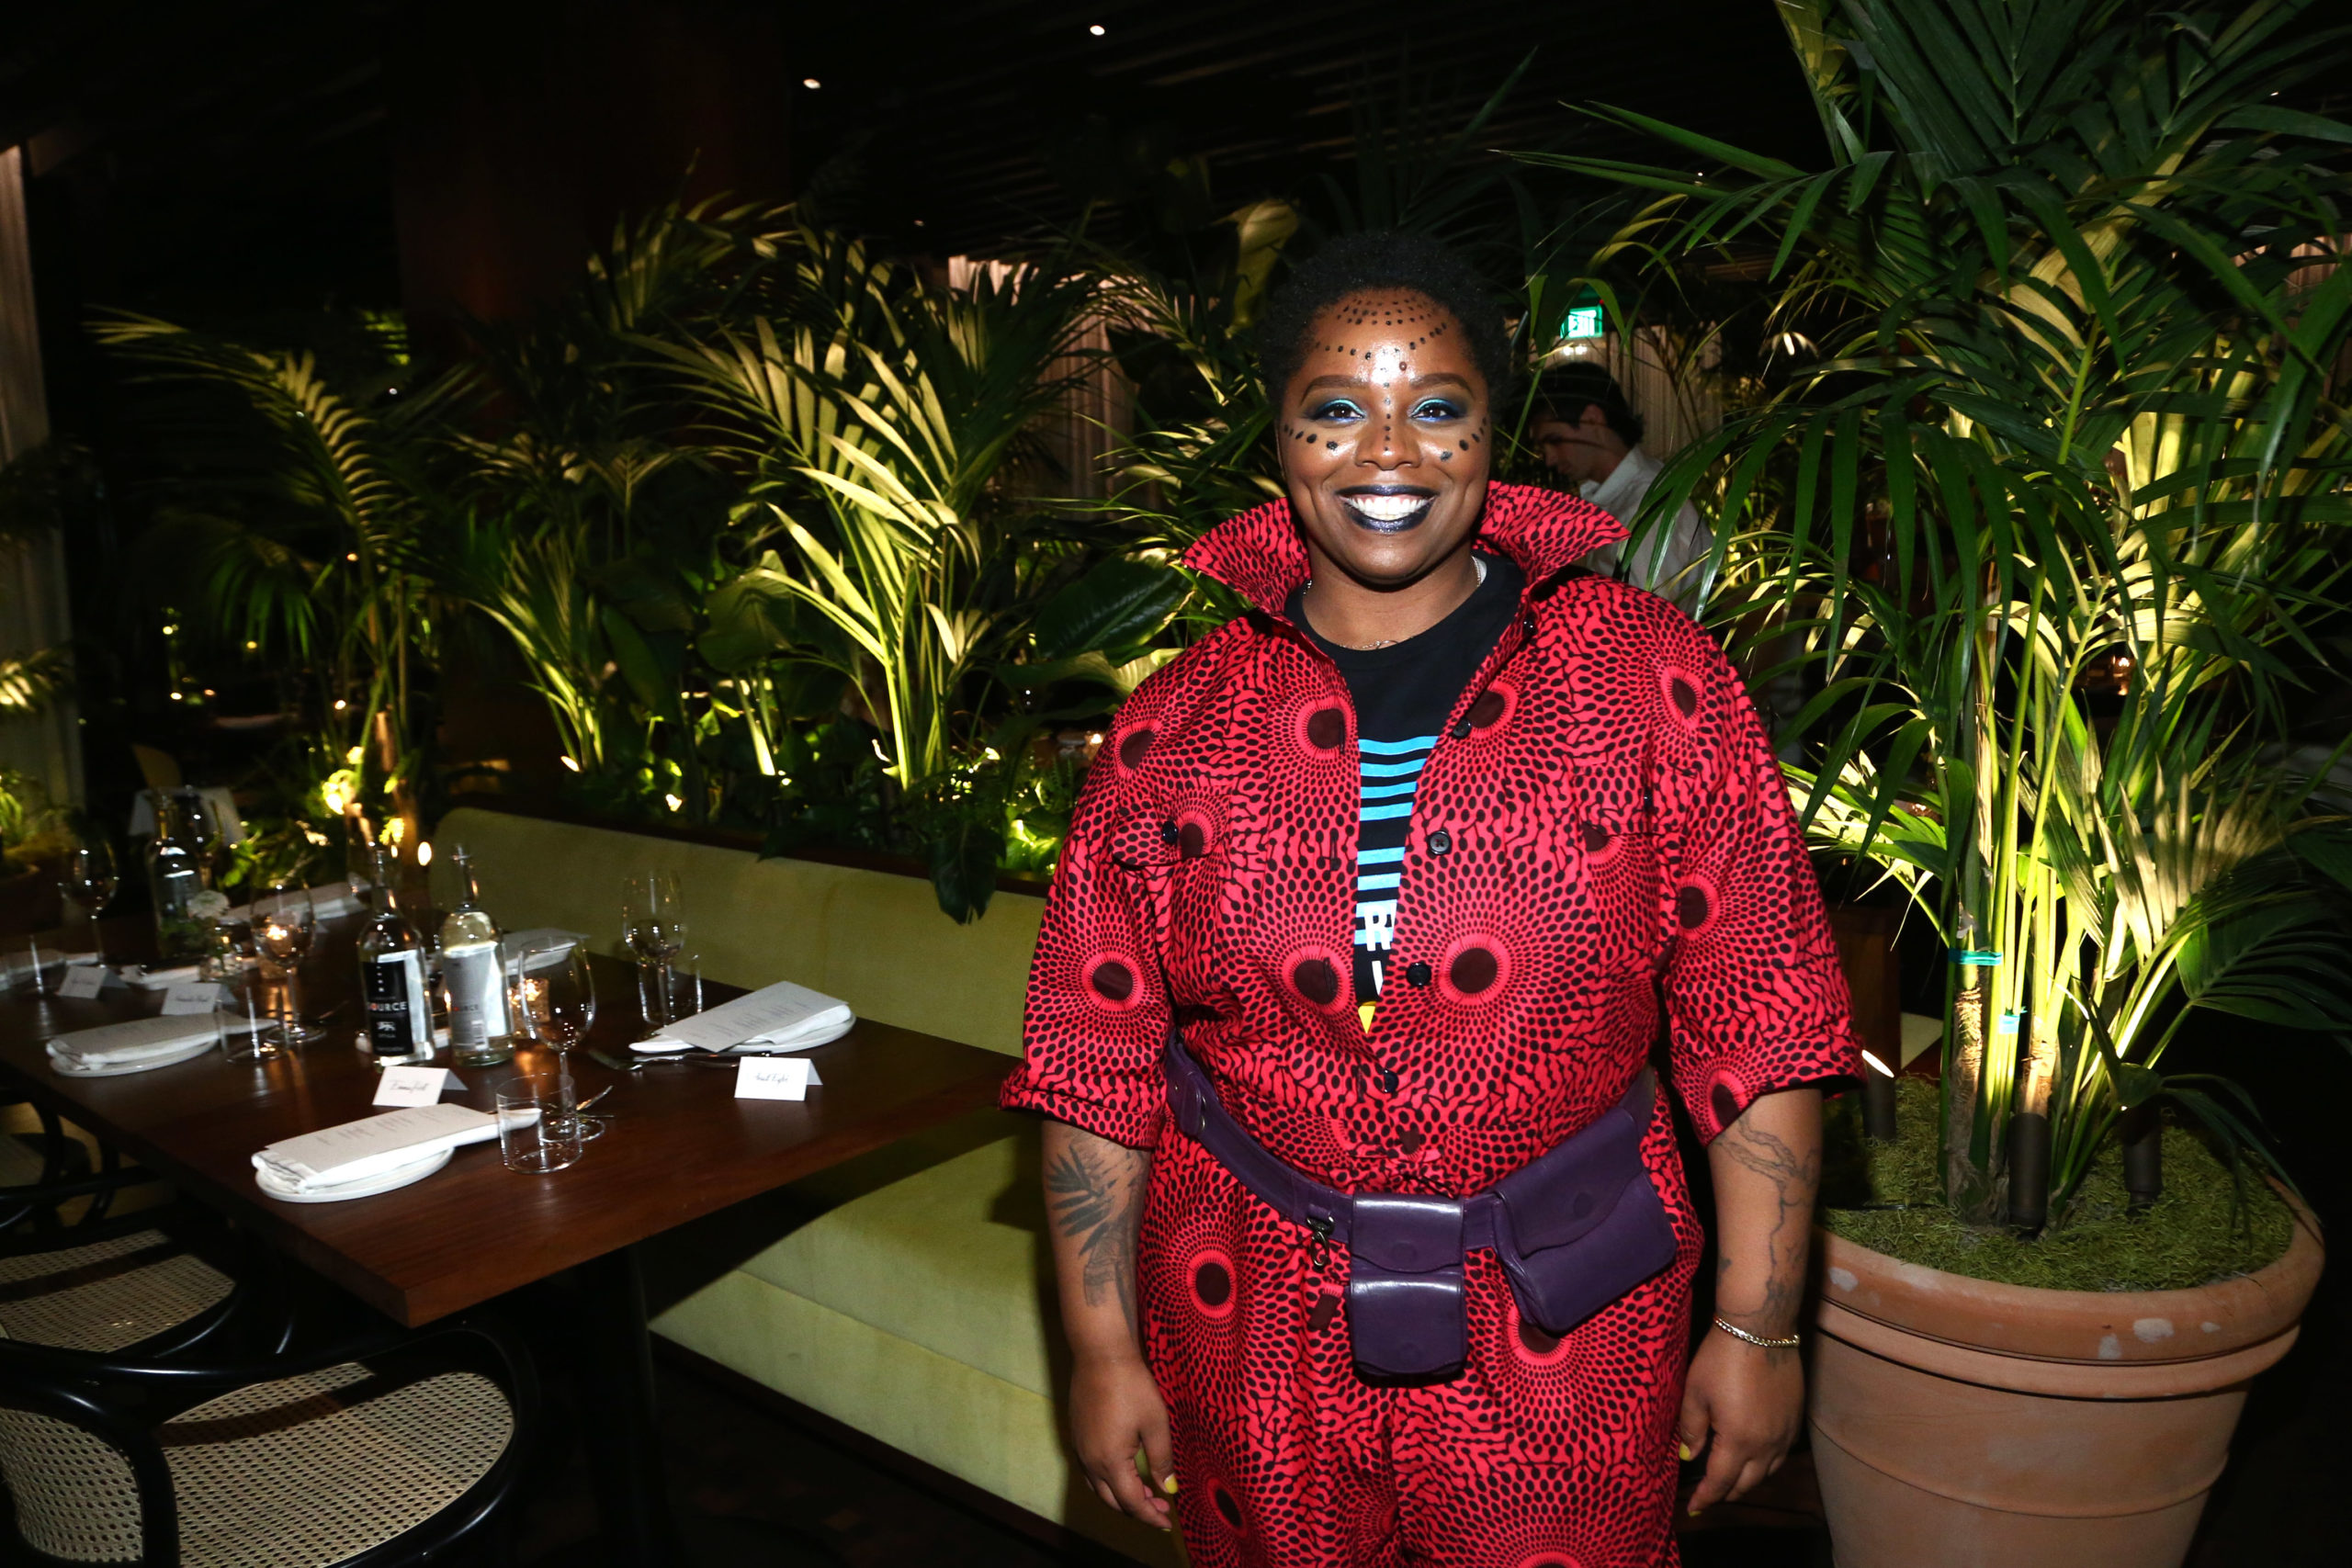 WEST HOLLYWOOD, CALIFORNIA - FEBRUARY 13: Patrisse Cullors attends the Frieze Project Artist Patrisse Cullors x Summit x Cultured Magazine Dinner at The West Hollywood EDITION on February 13, 2020 in West Hollywood, California. (Photo by Tommaso Boddi/Getty Images for The West Hollywood EDITION)